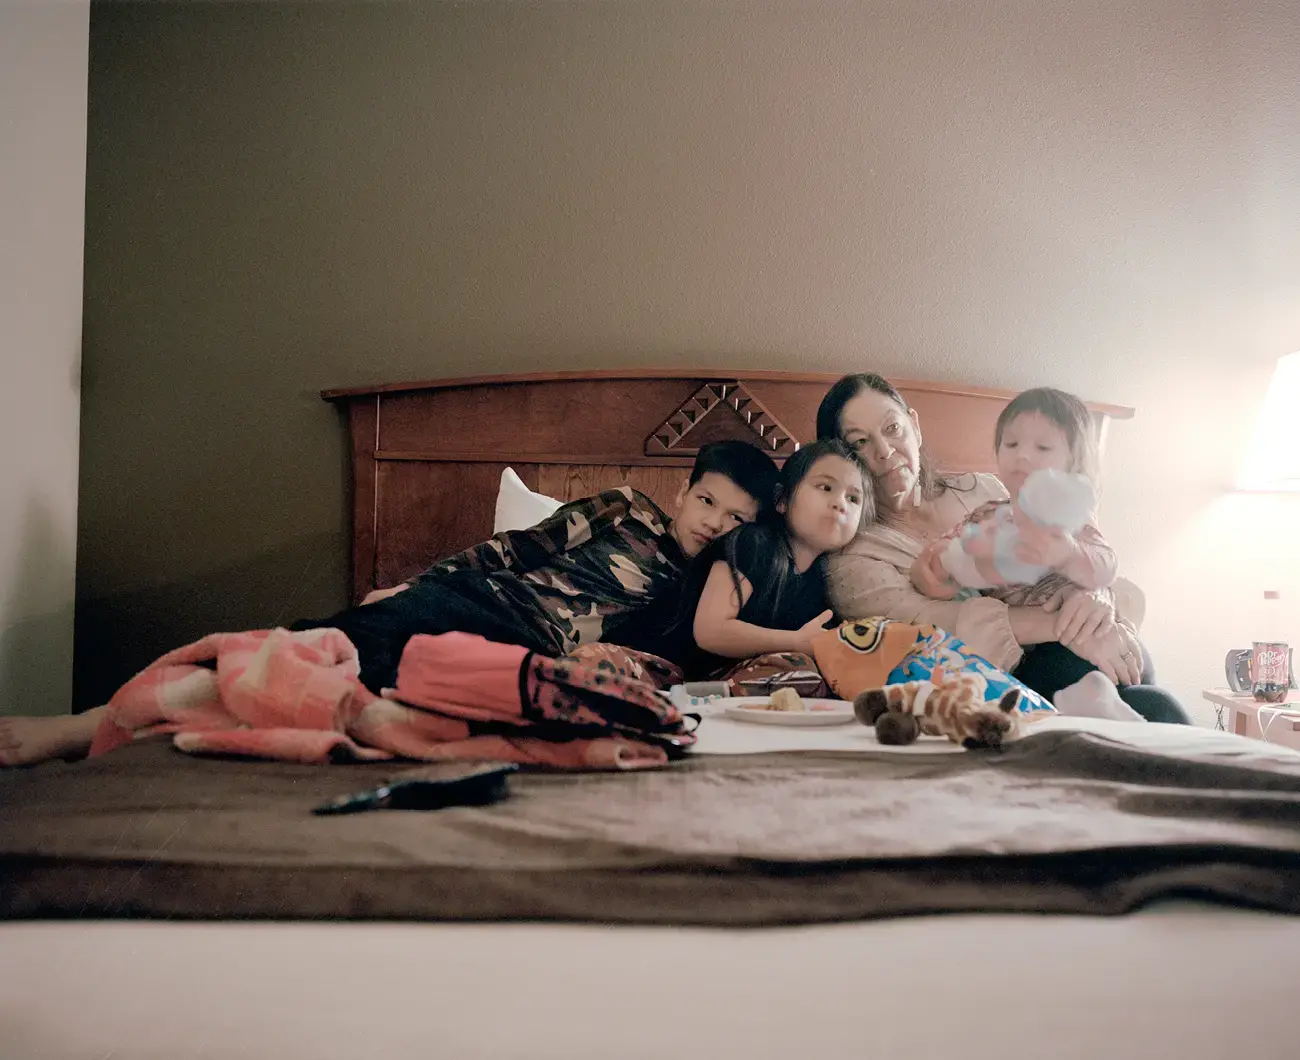 A grandmother sits on a bed with her three young grandchildren. Toys, a backpack, and Cheetos are visible on the bed.